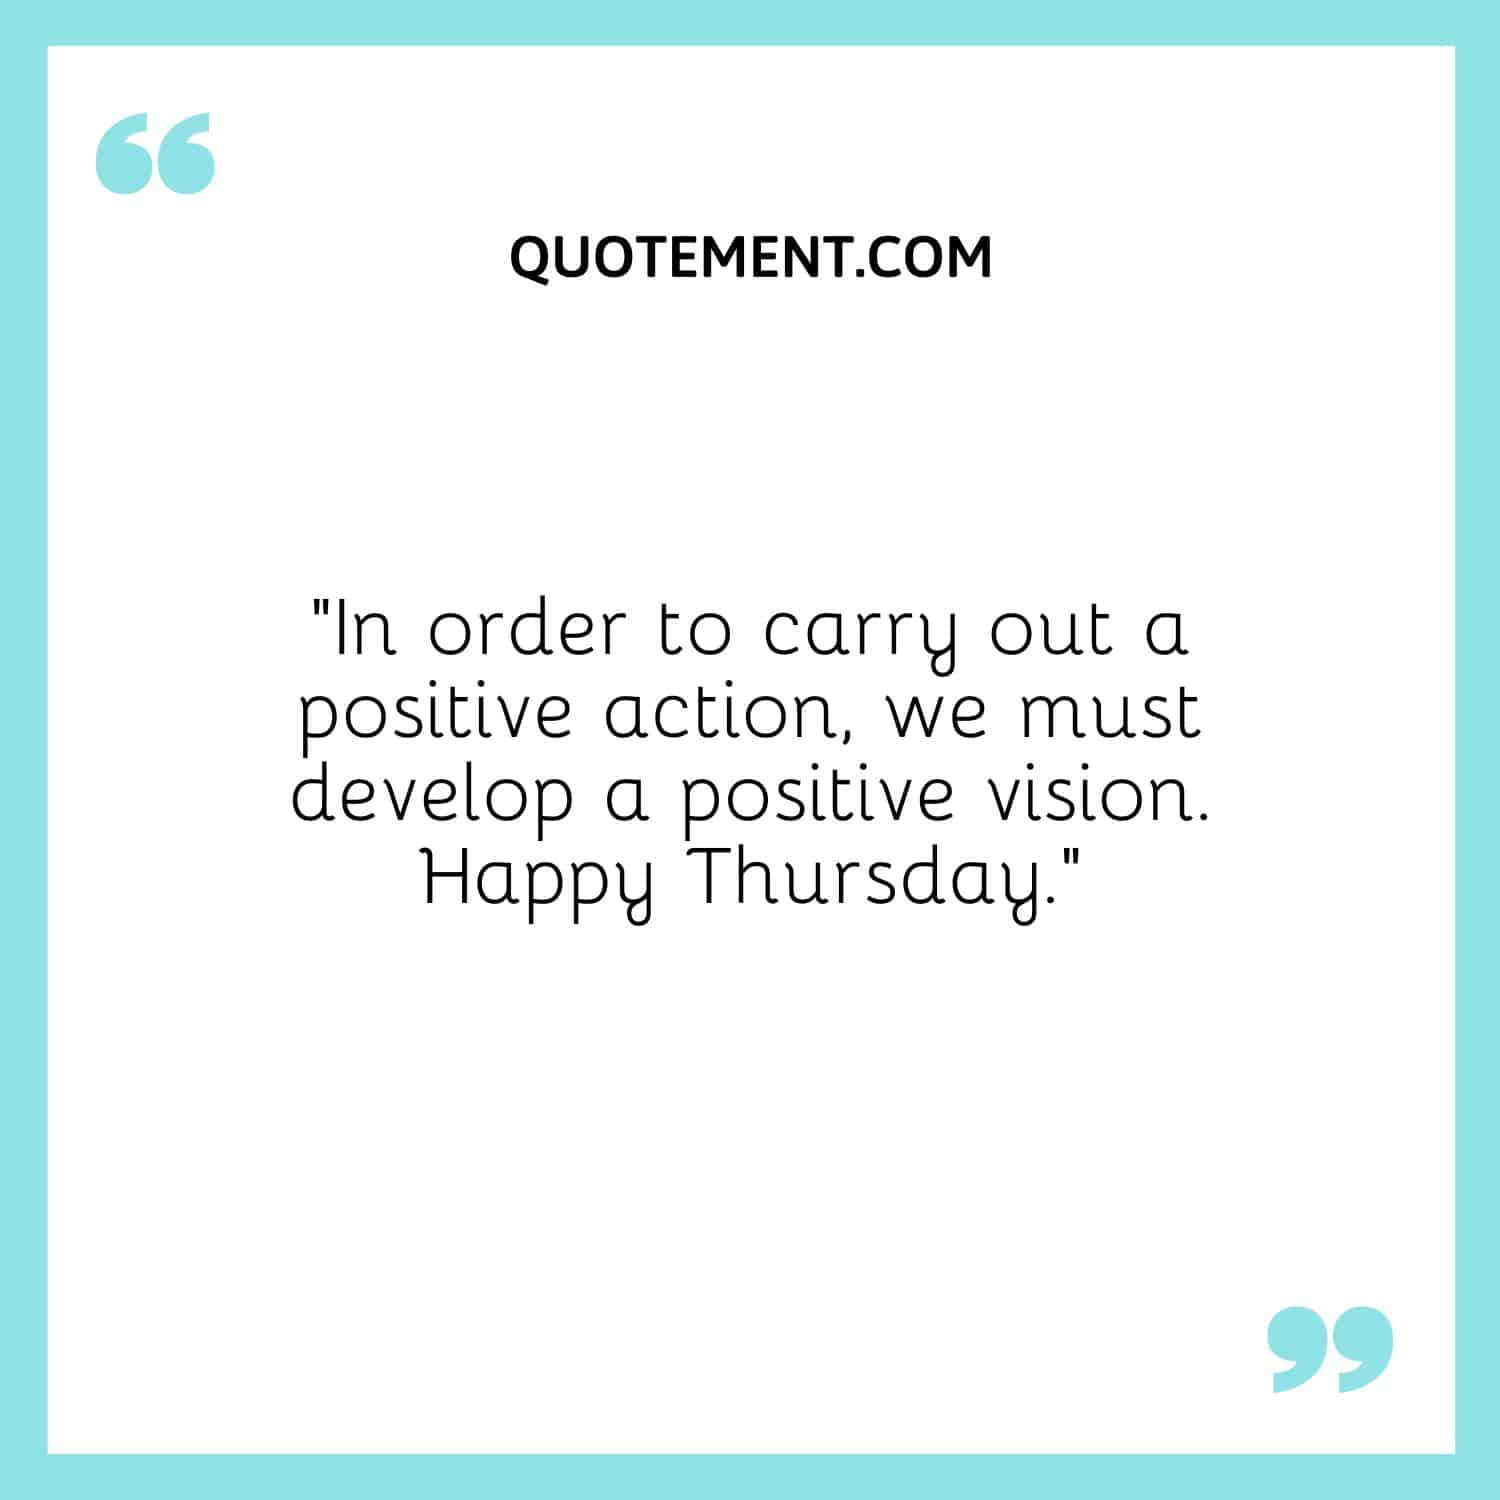 “In order to carry out a positive action, we must develop a positive vision. Happy Thursday.”